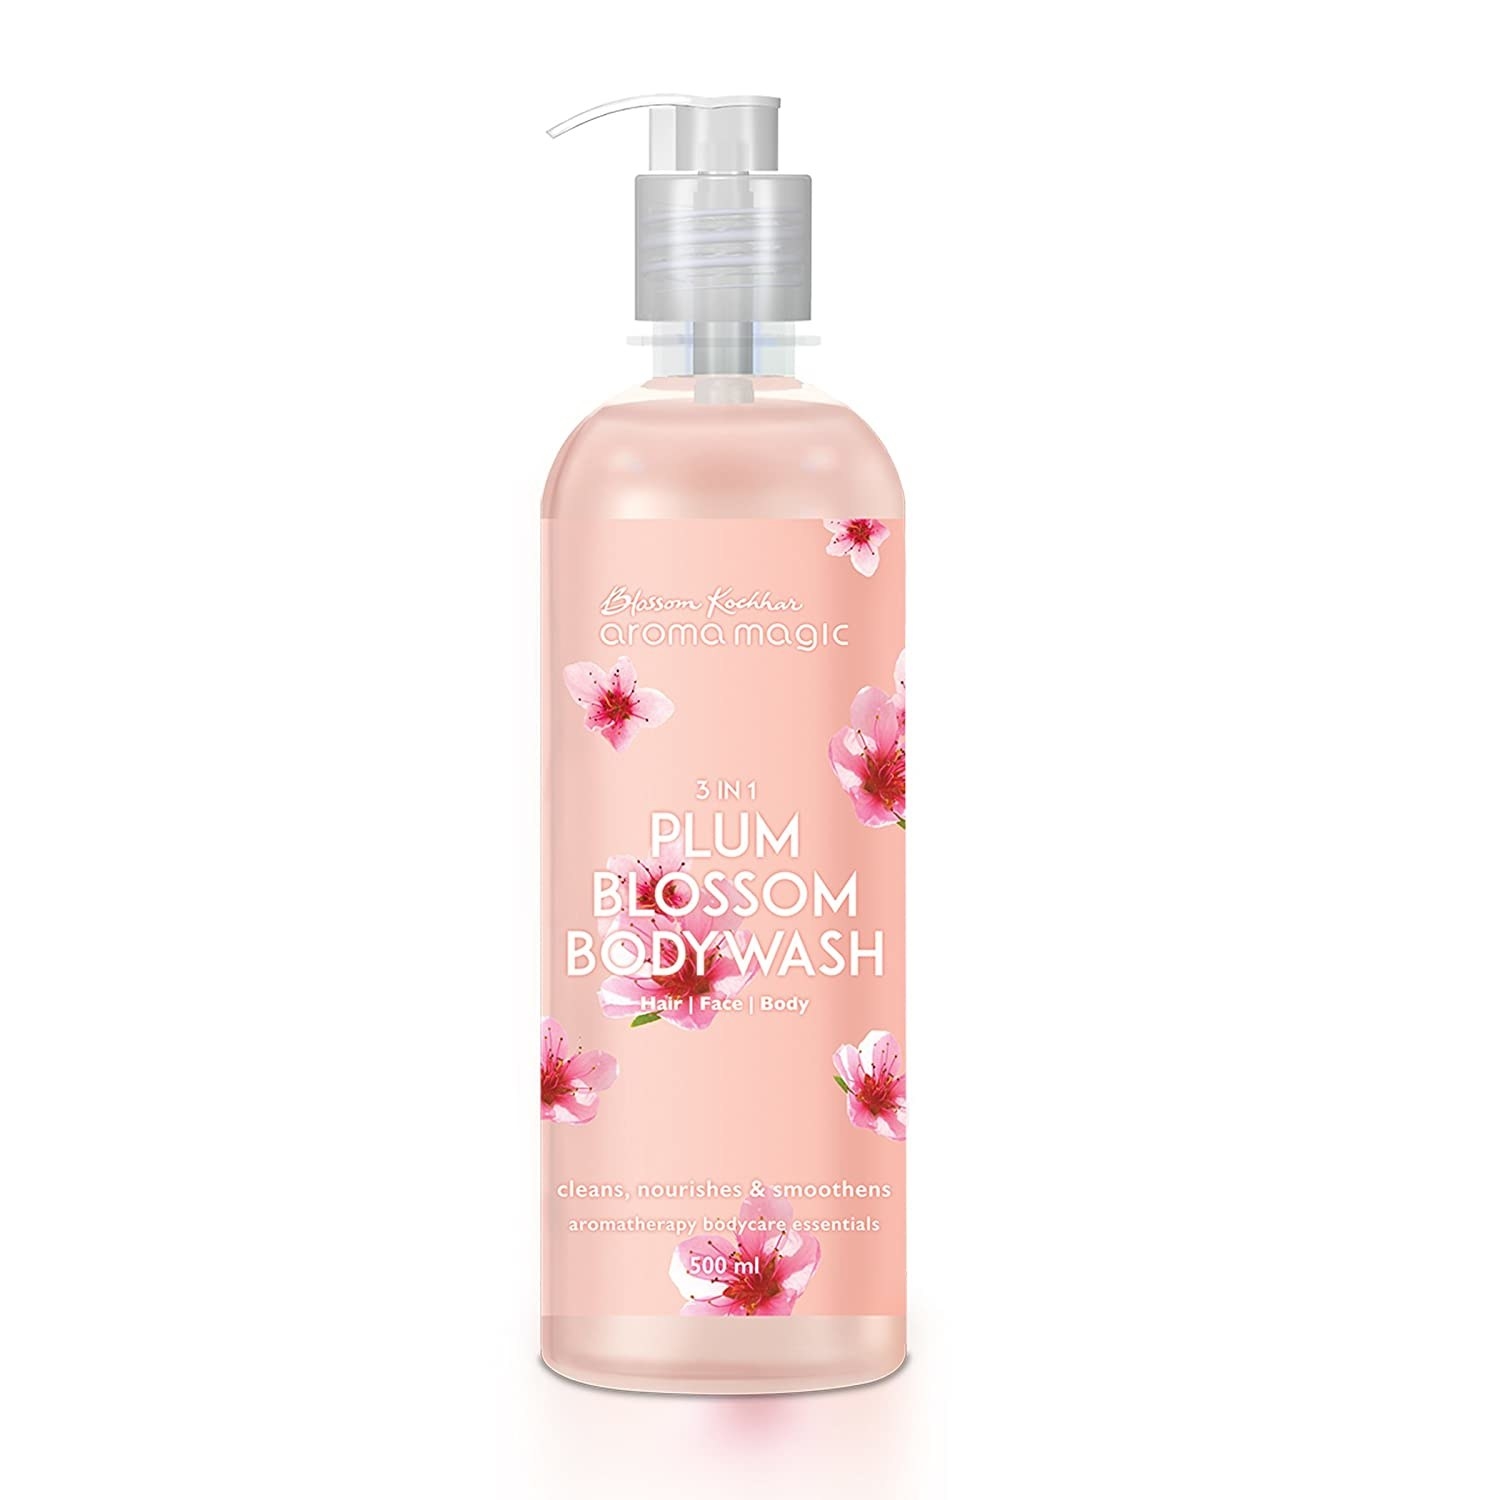 Bottle of the plum body wash 